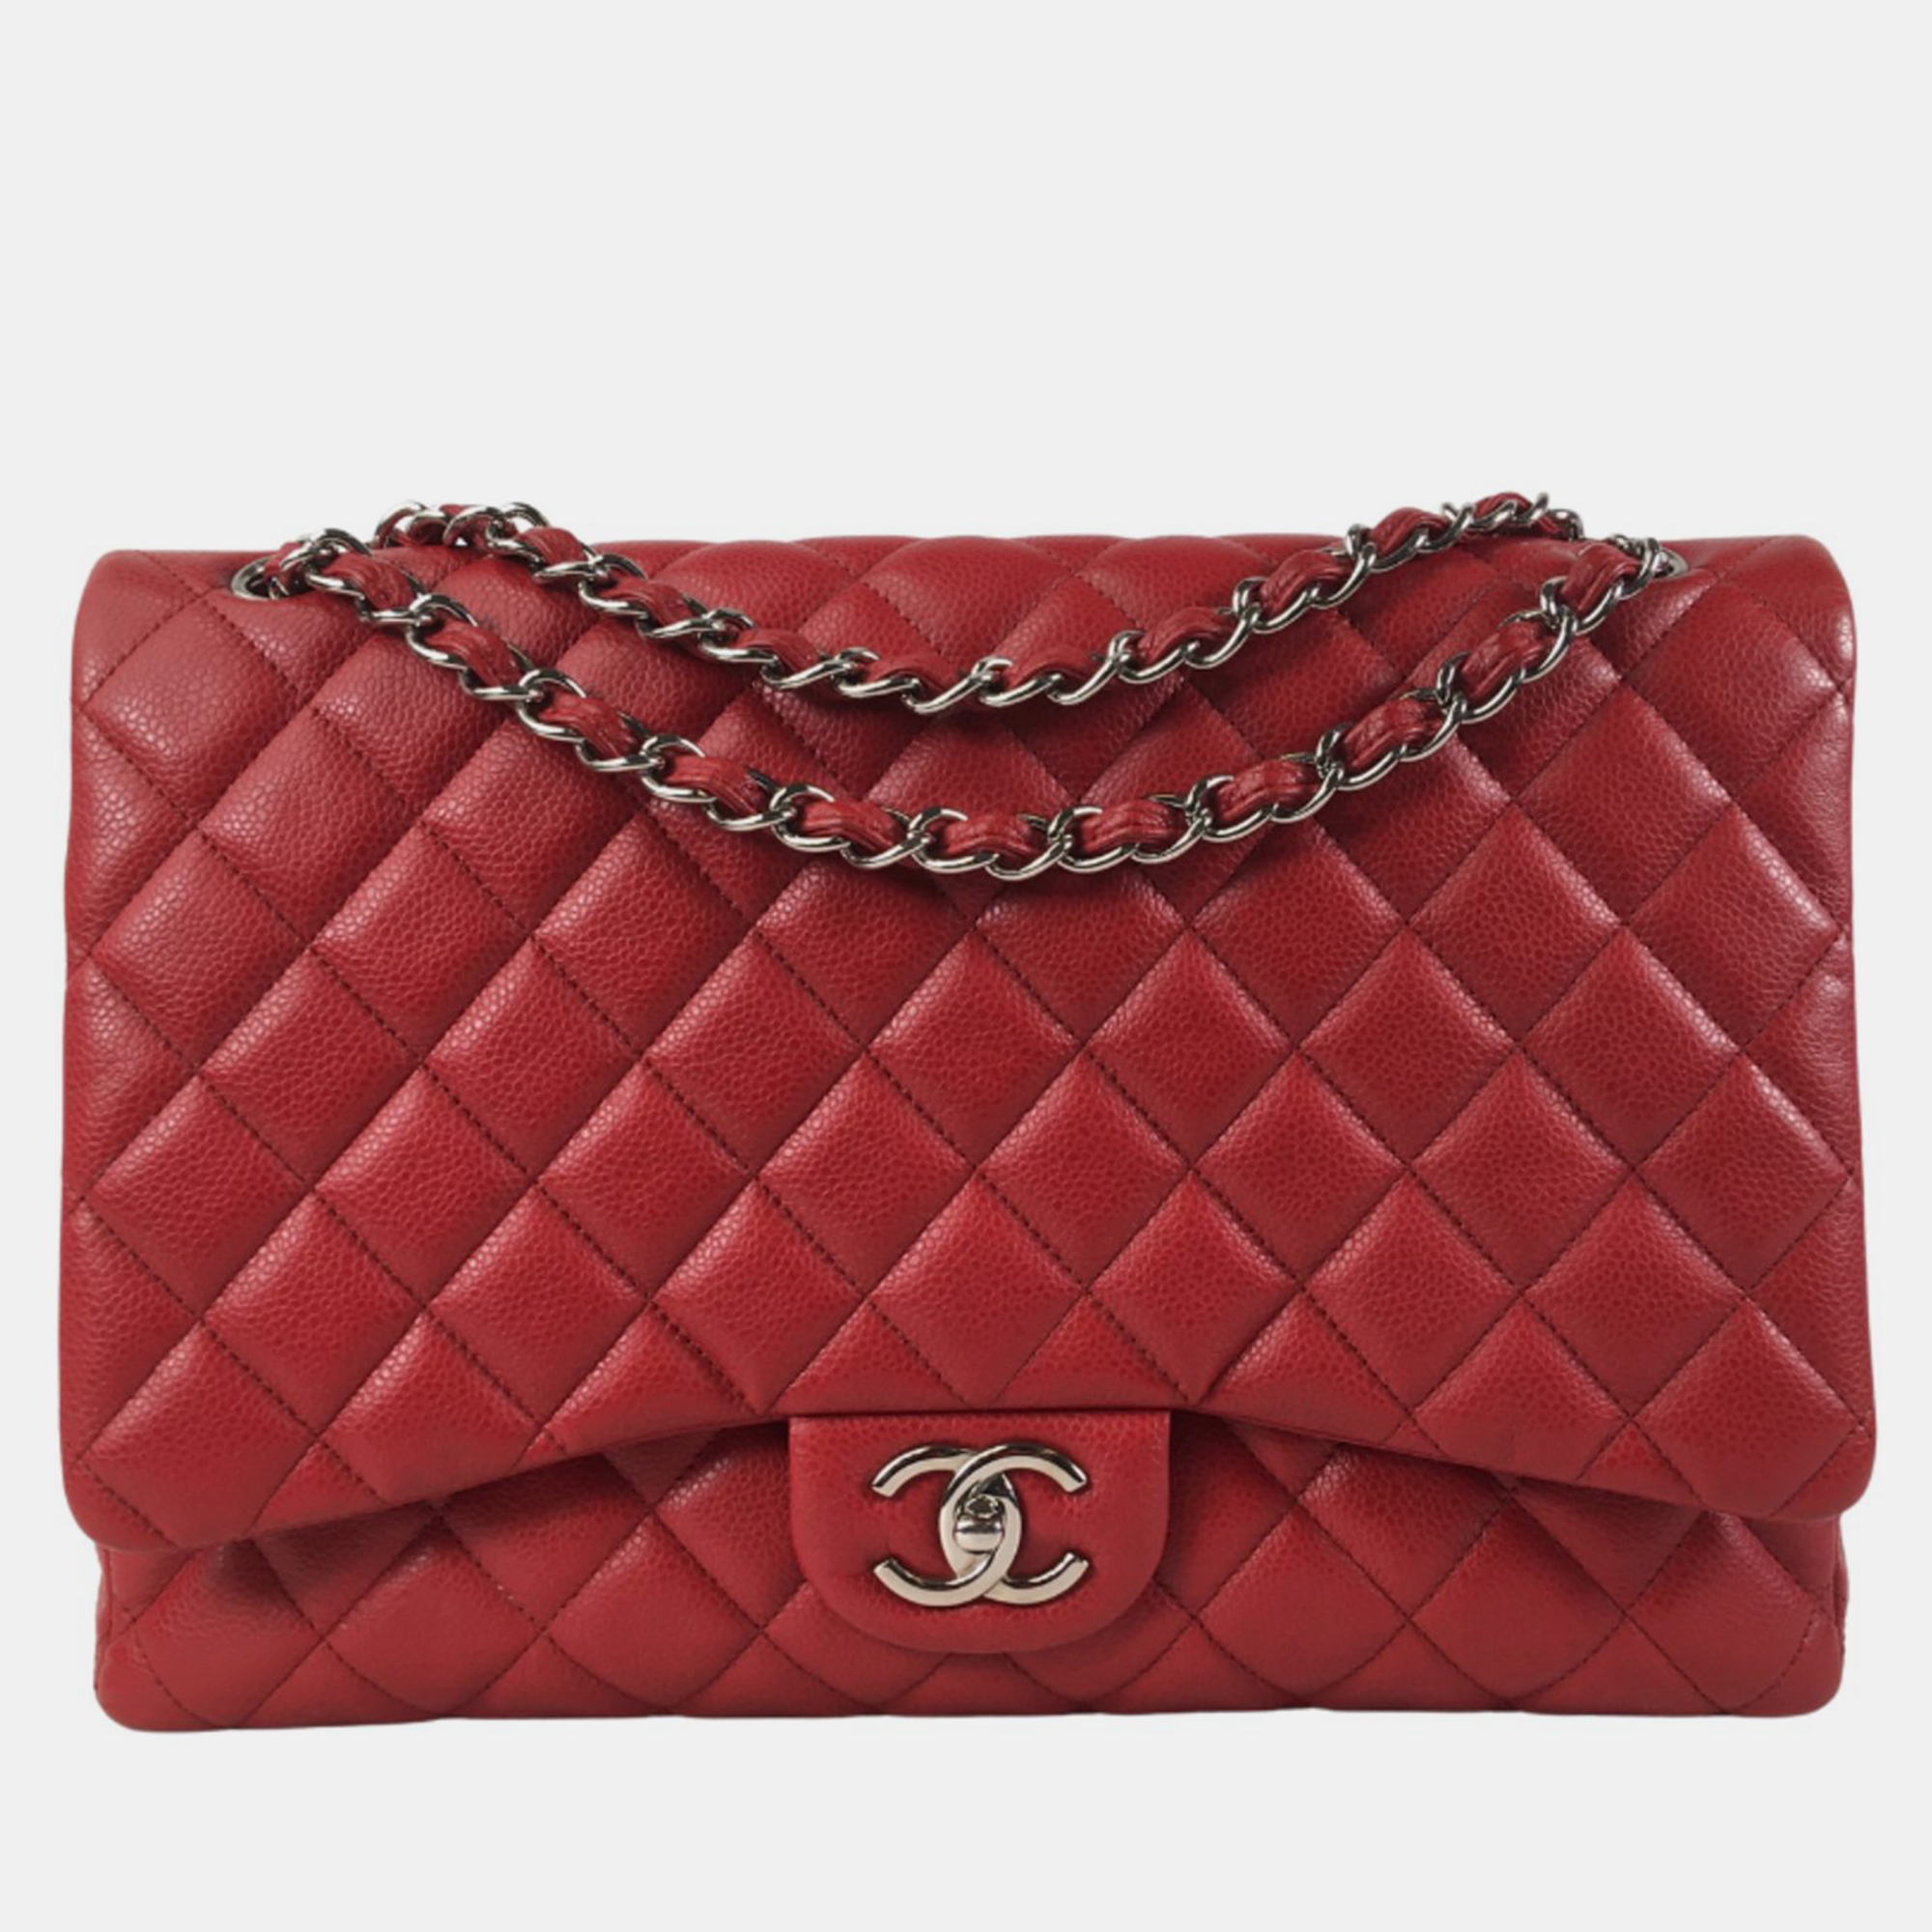 Chanel red lambskin leather maxi classic double flap shoulder bags